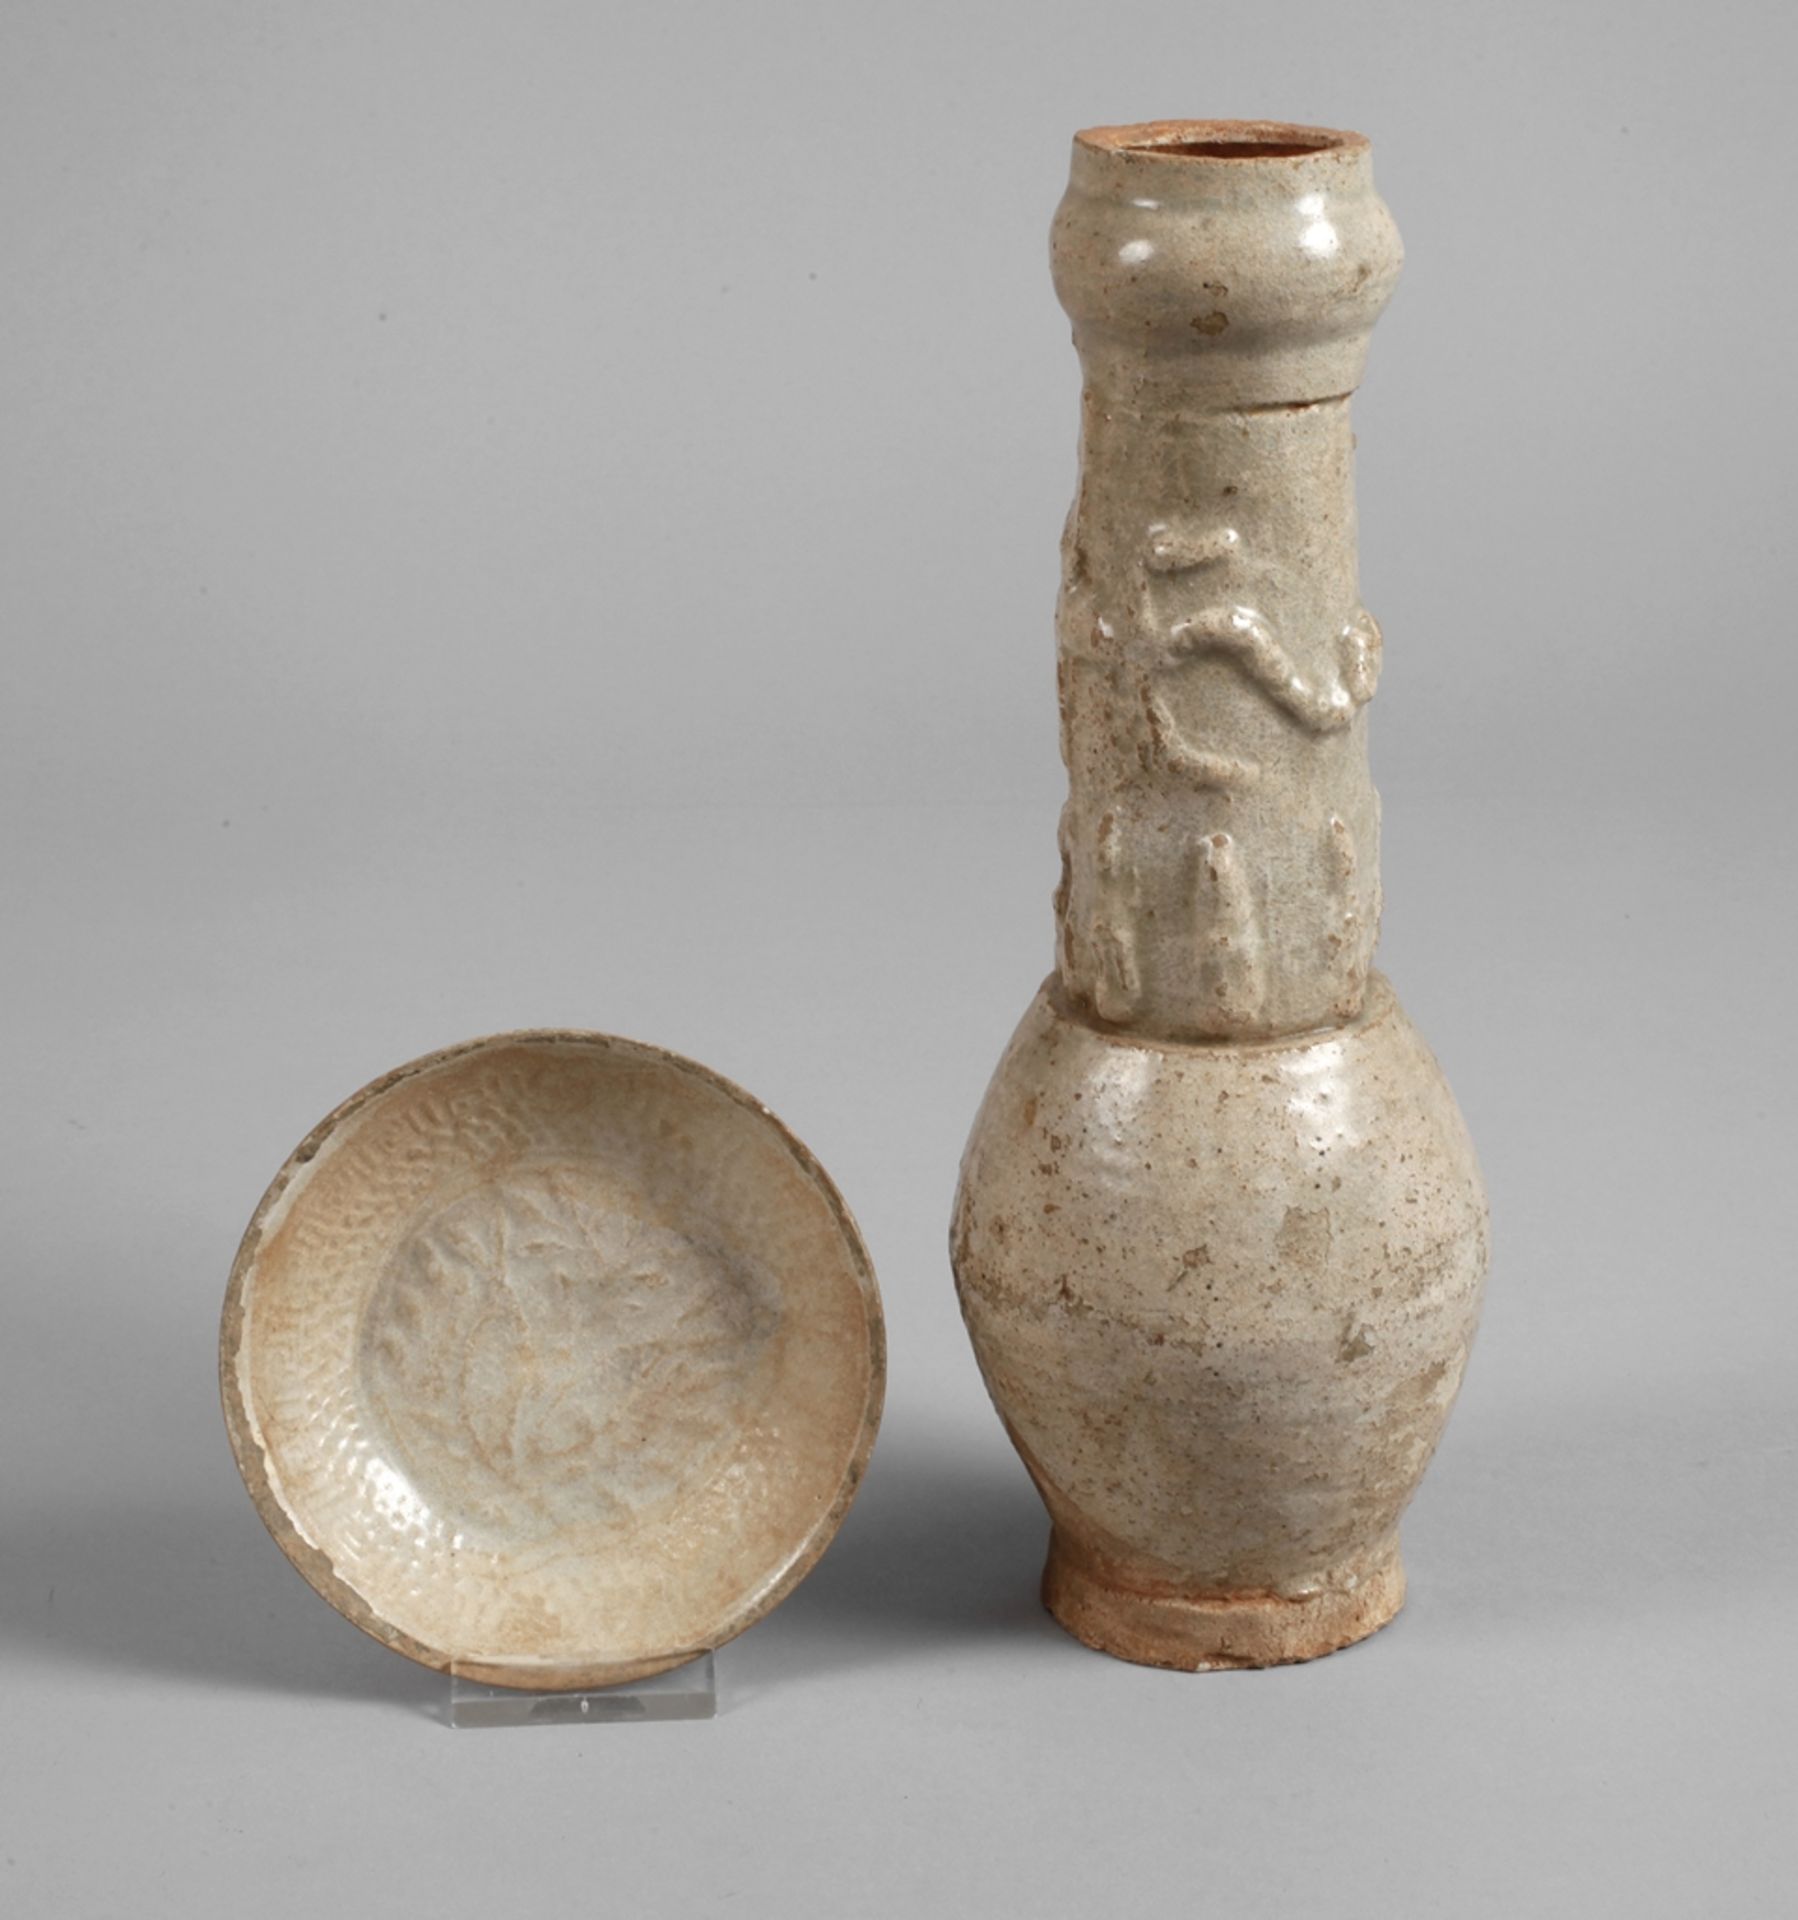 Urn and bowl